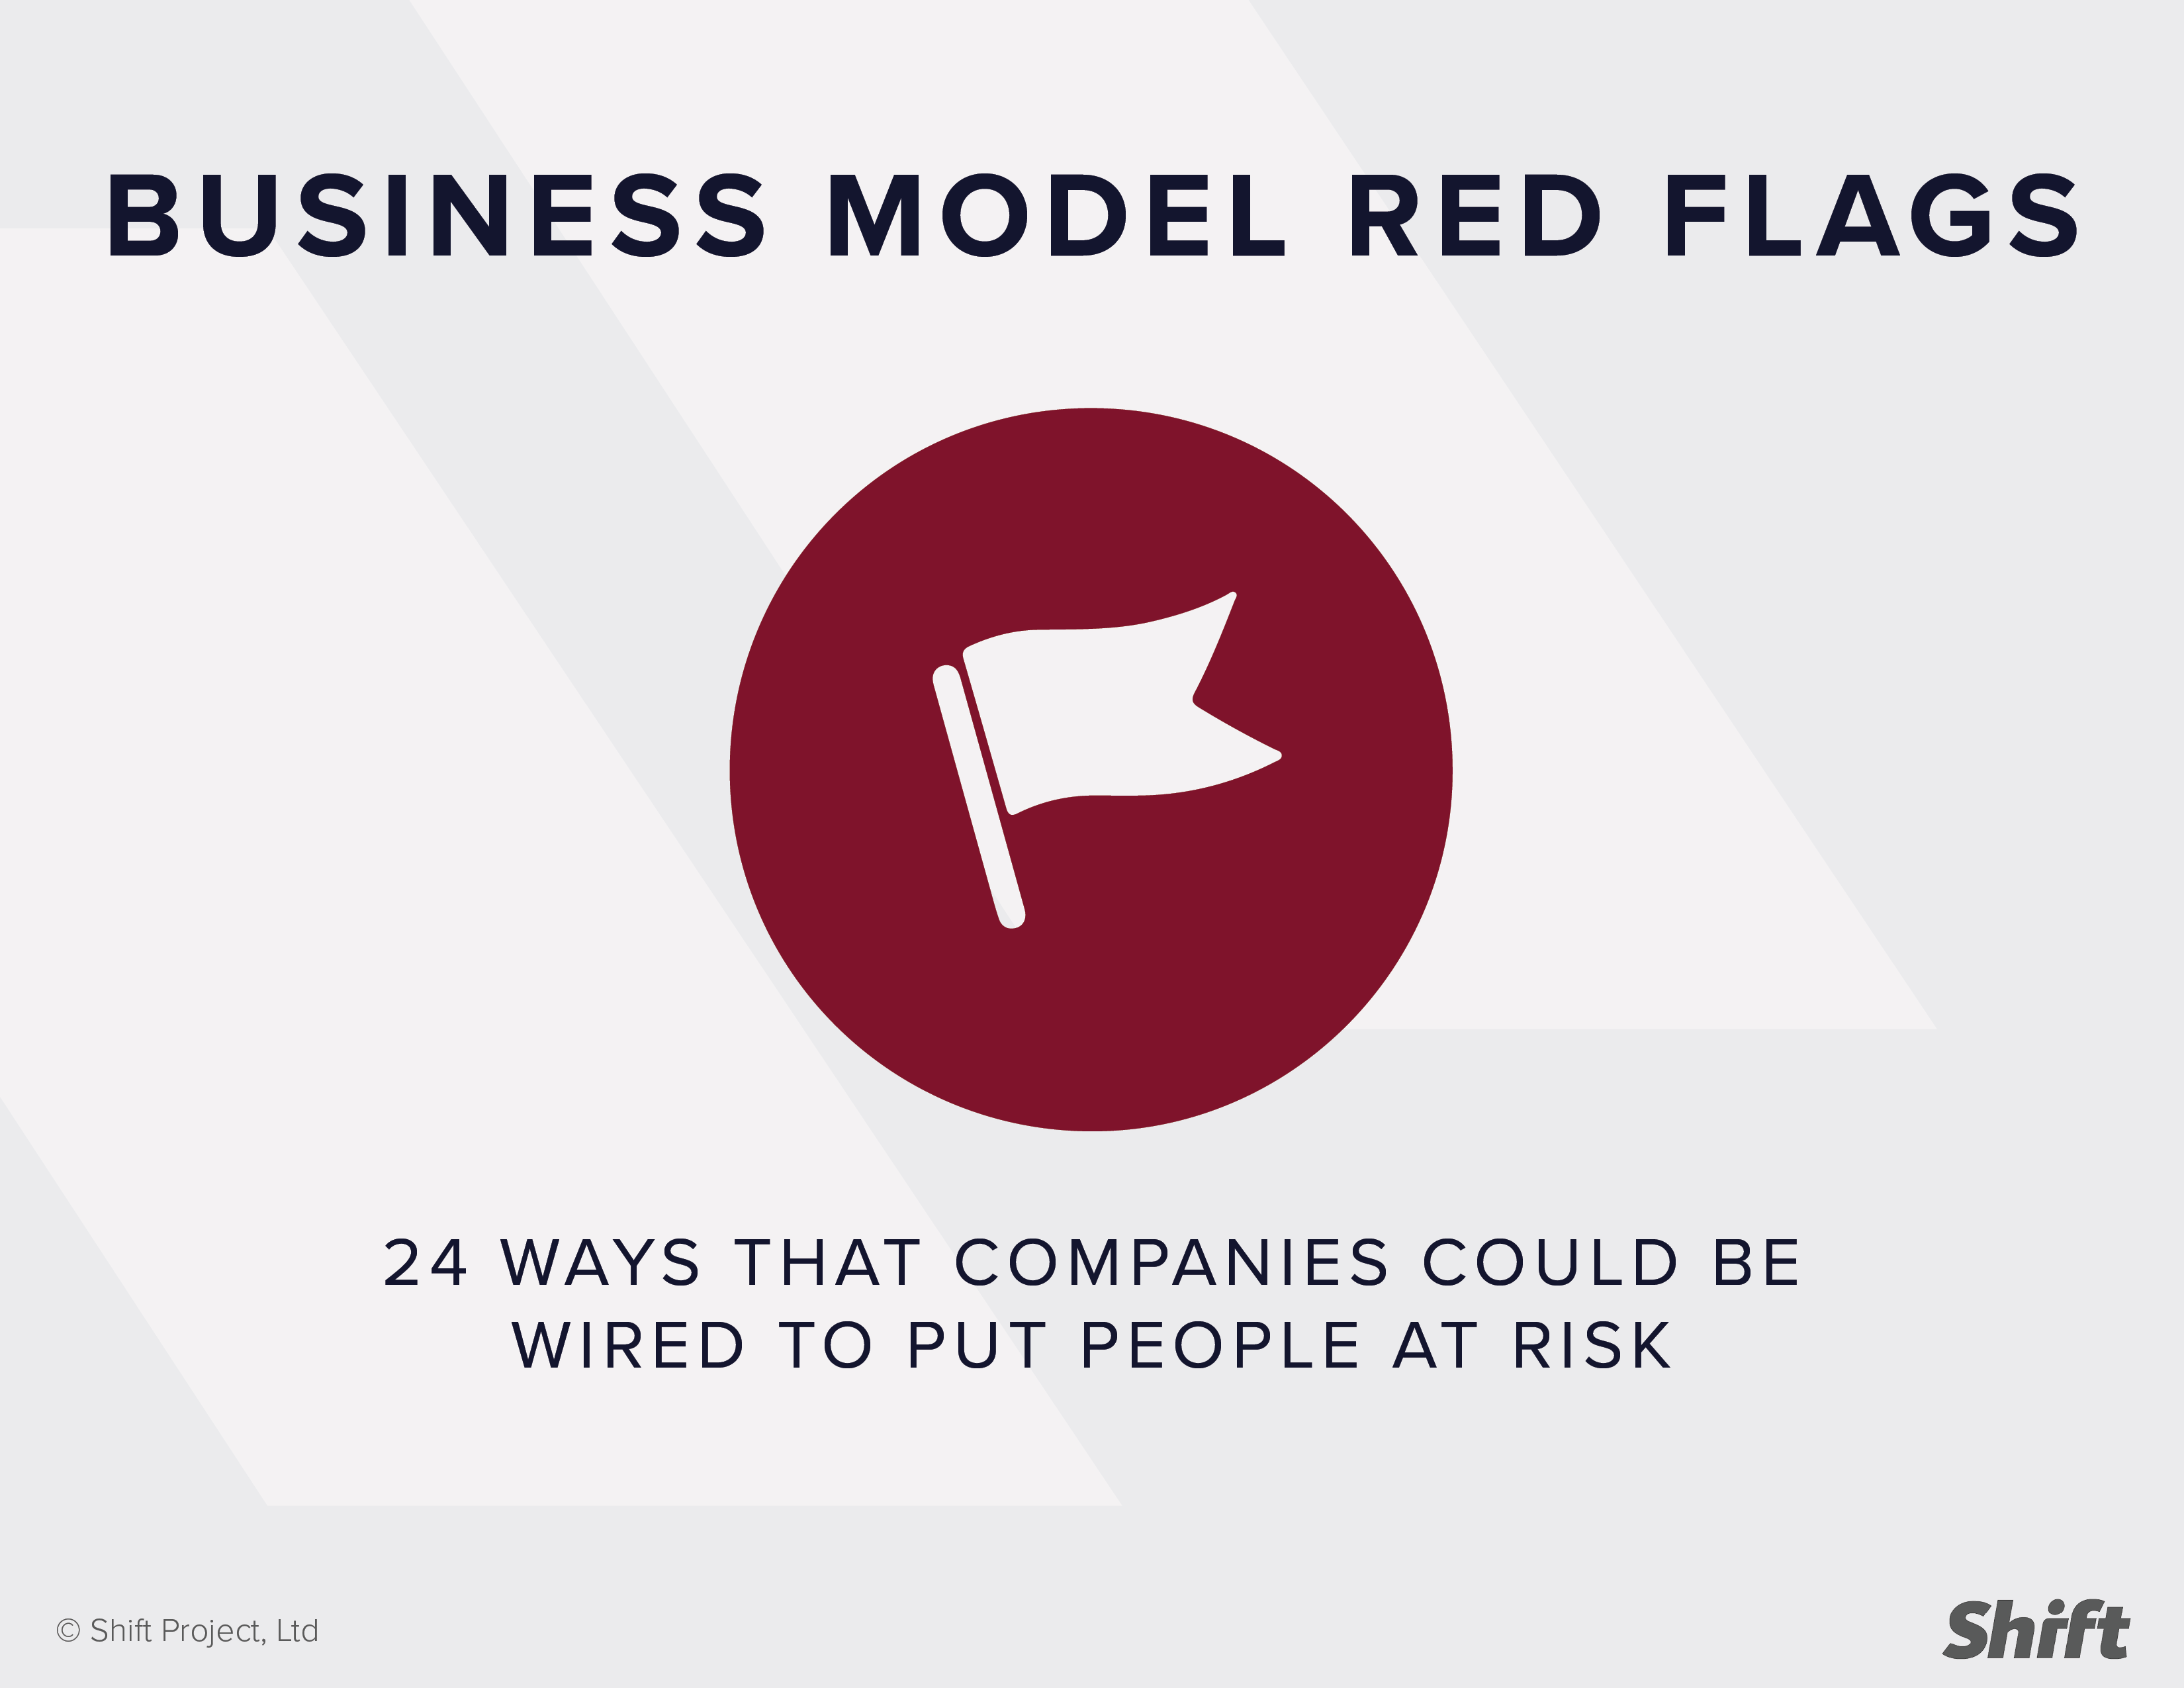 Business Model Red Flags cover